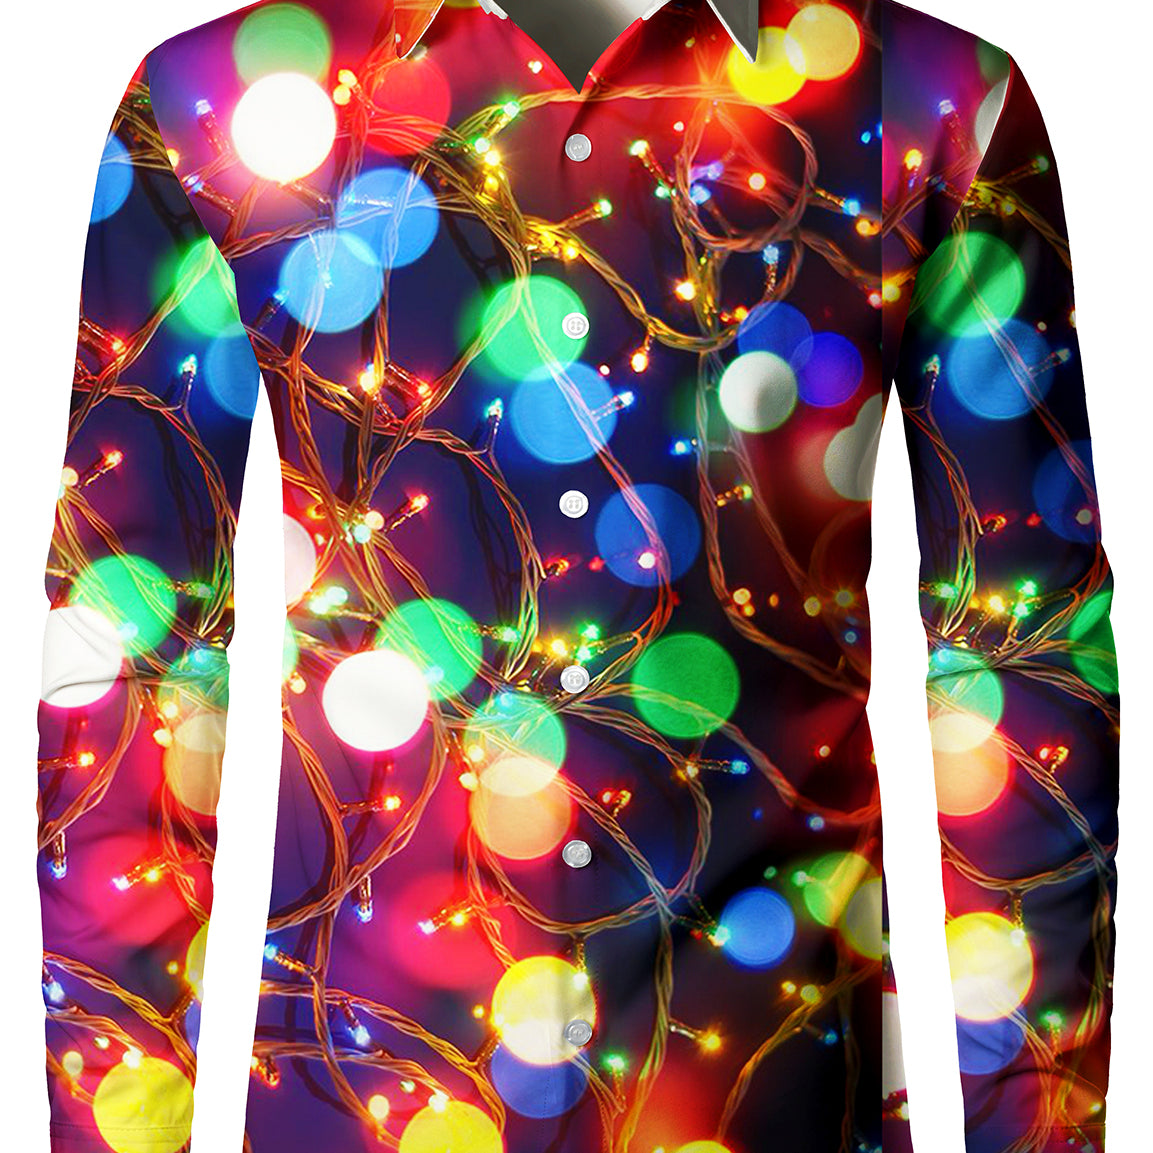 Men's Christmas Neon Long Sleeve Holiday Party Button Up Shirt